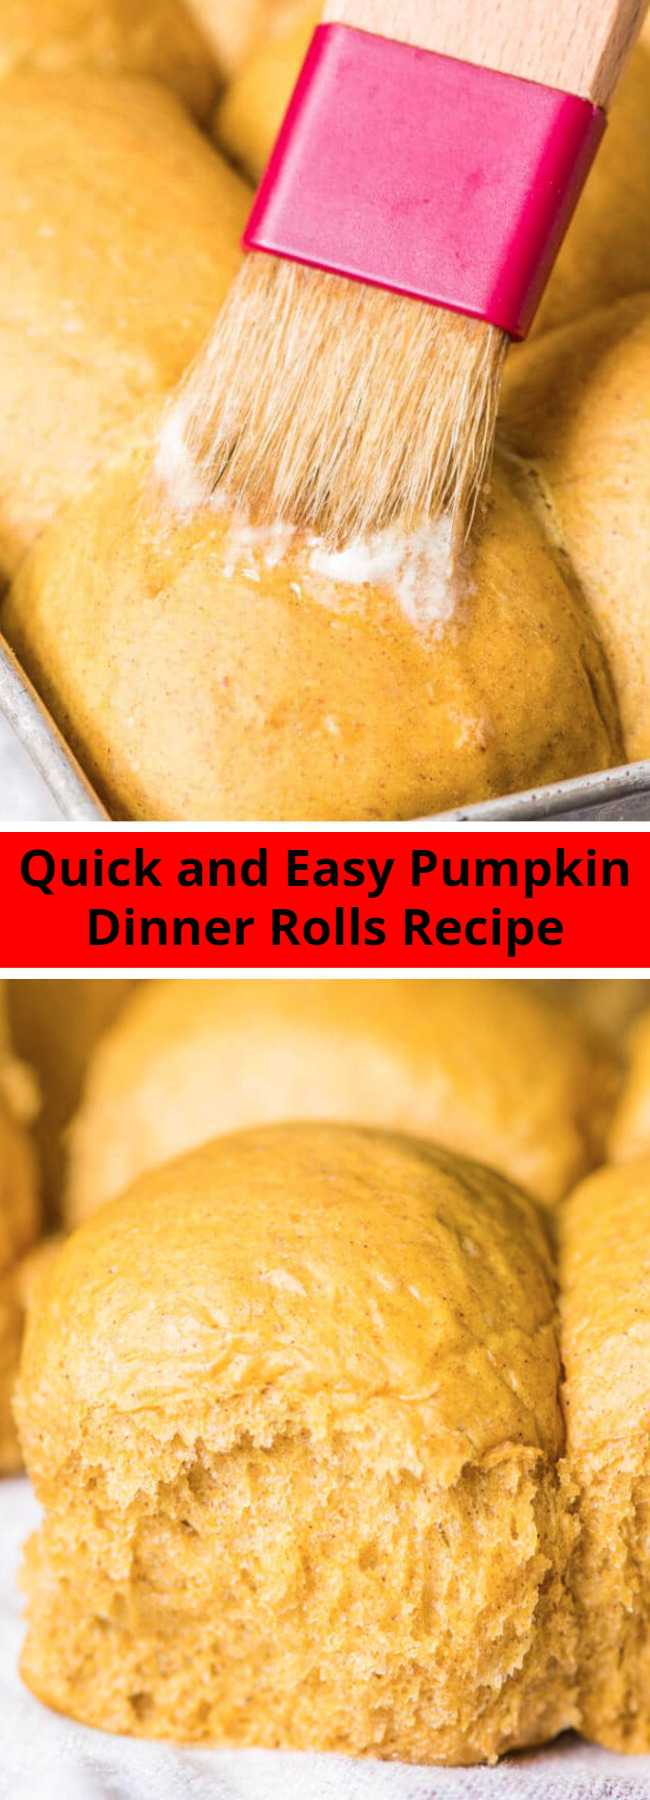 Quick and Easy Pumpkin Dinner Rolls Recipe - Quick and easy Pumpkin Dinner Rolls are egg free and filled with pumpkin spice flavor. The perfect bread for Thanksgiving dinner. #thanksgiving #thanksgivingrecipes #pumpkin #pumpkinbread